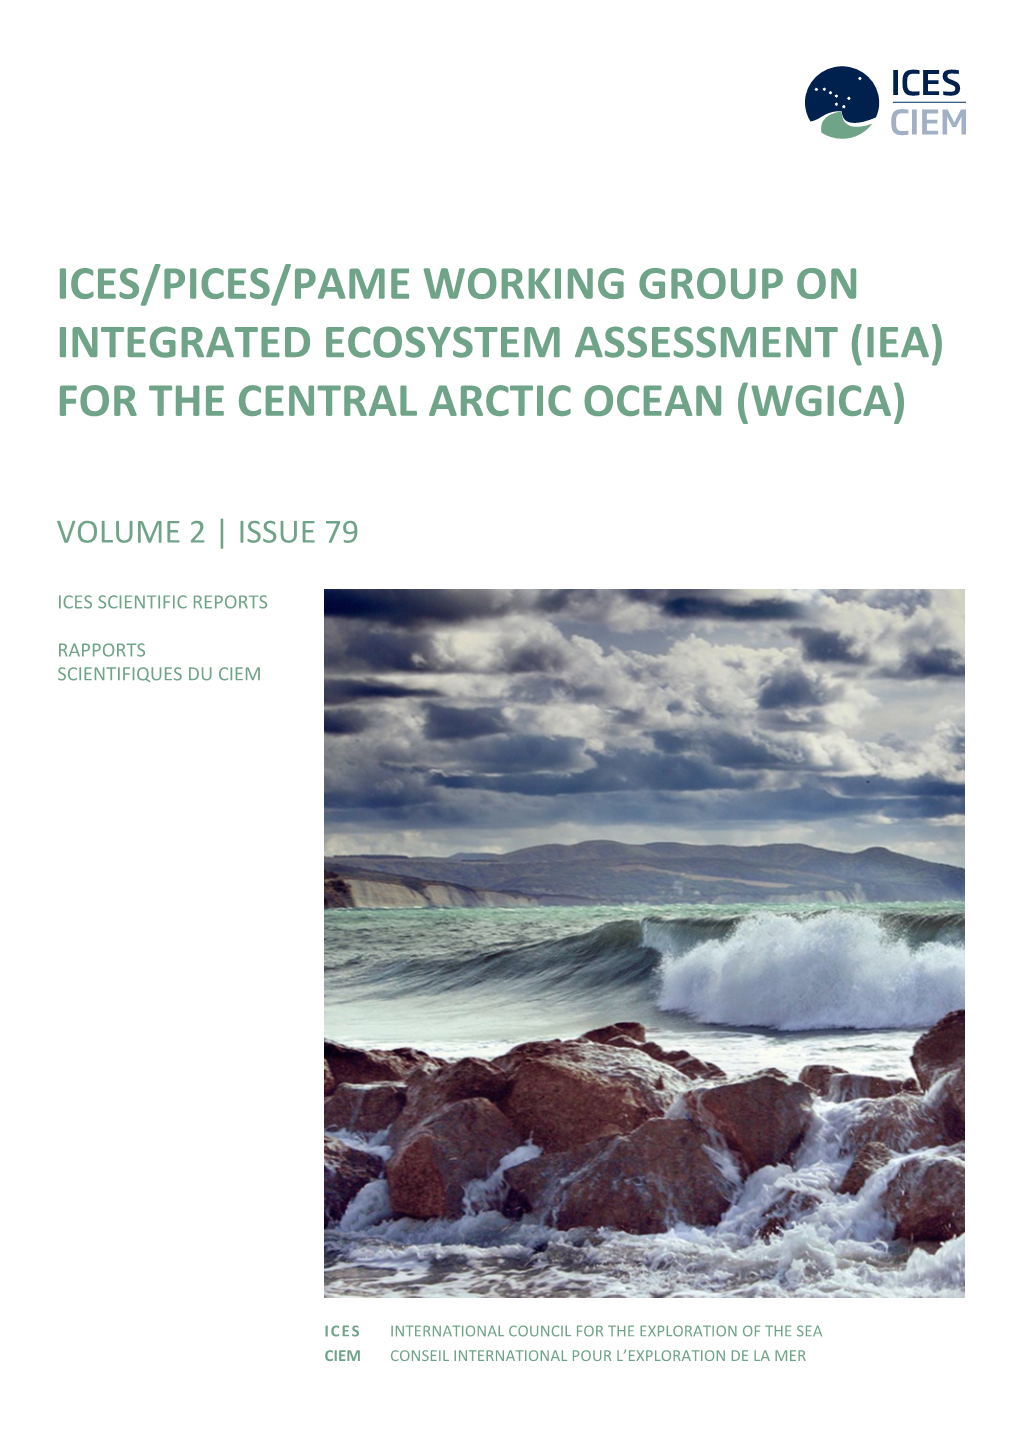 Ices/Pices/Pame Working Group on Integrated Ecosystem Assessment (Iea) for the Central Arctic Ocean (Wgica)